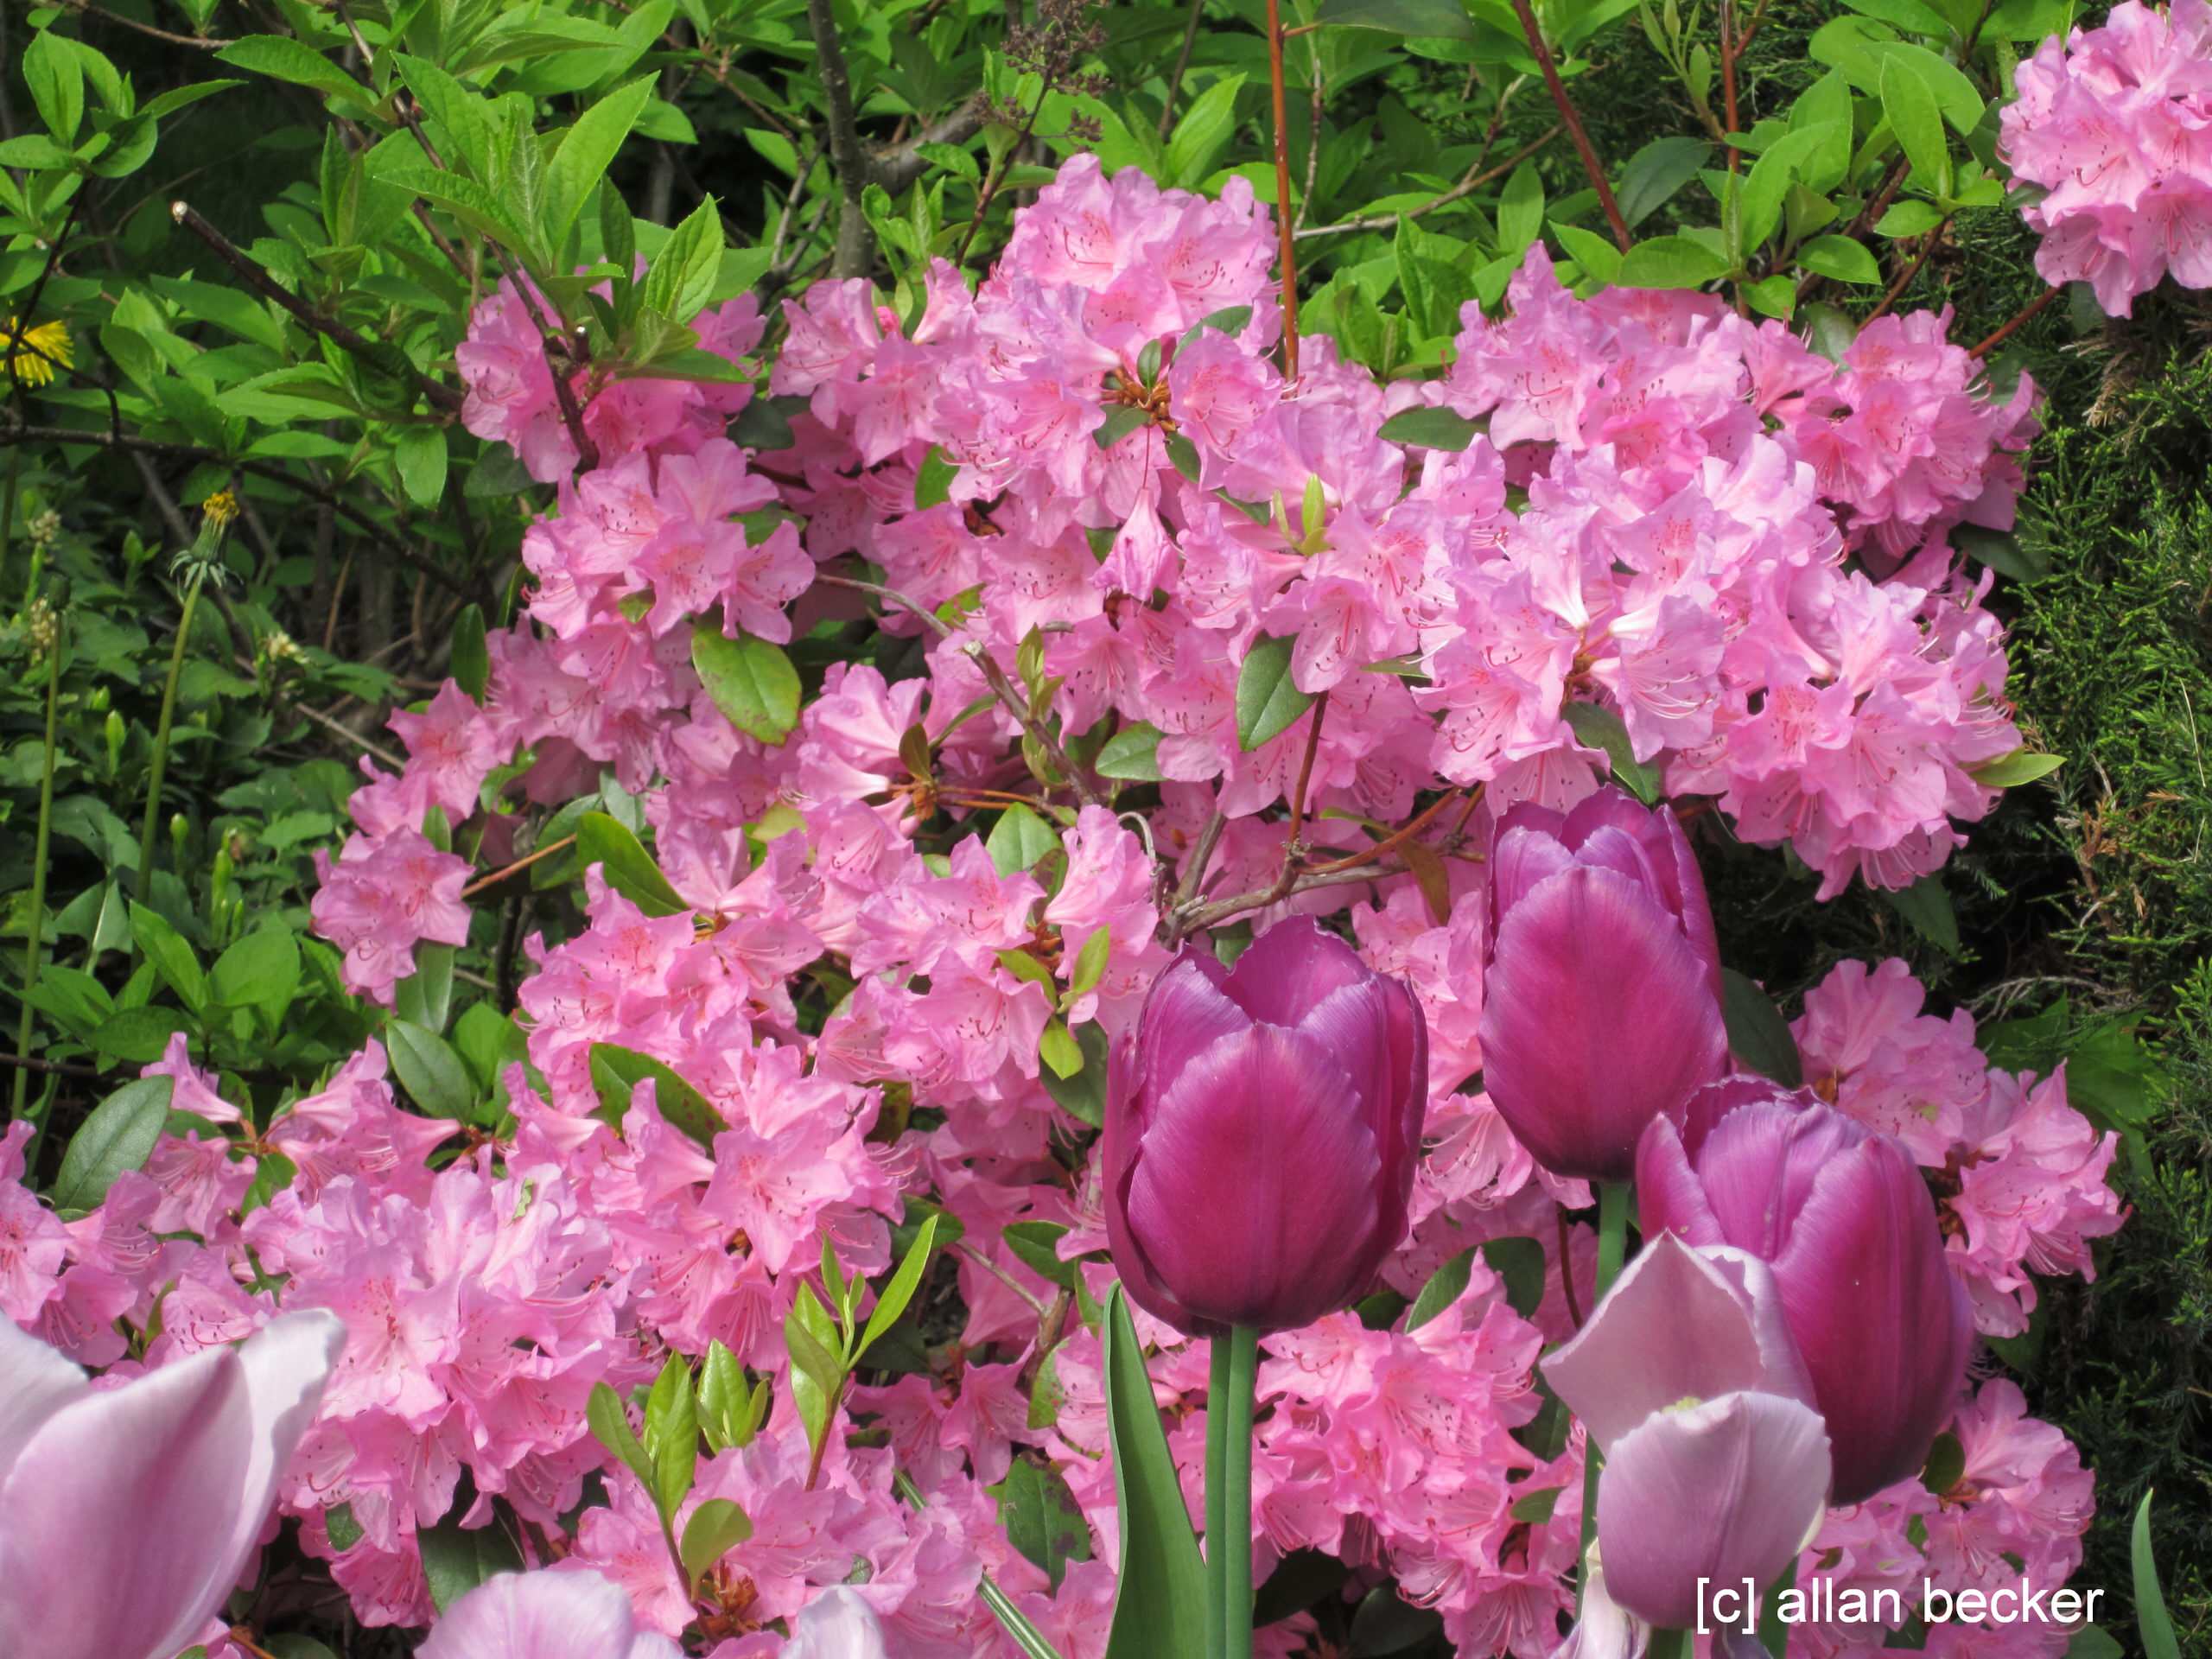 Pink is the favorite color in the flowerbed